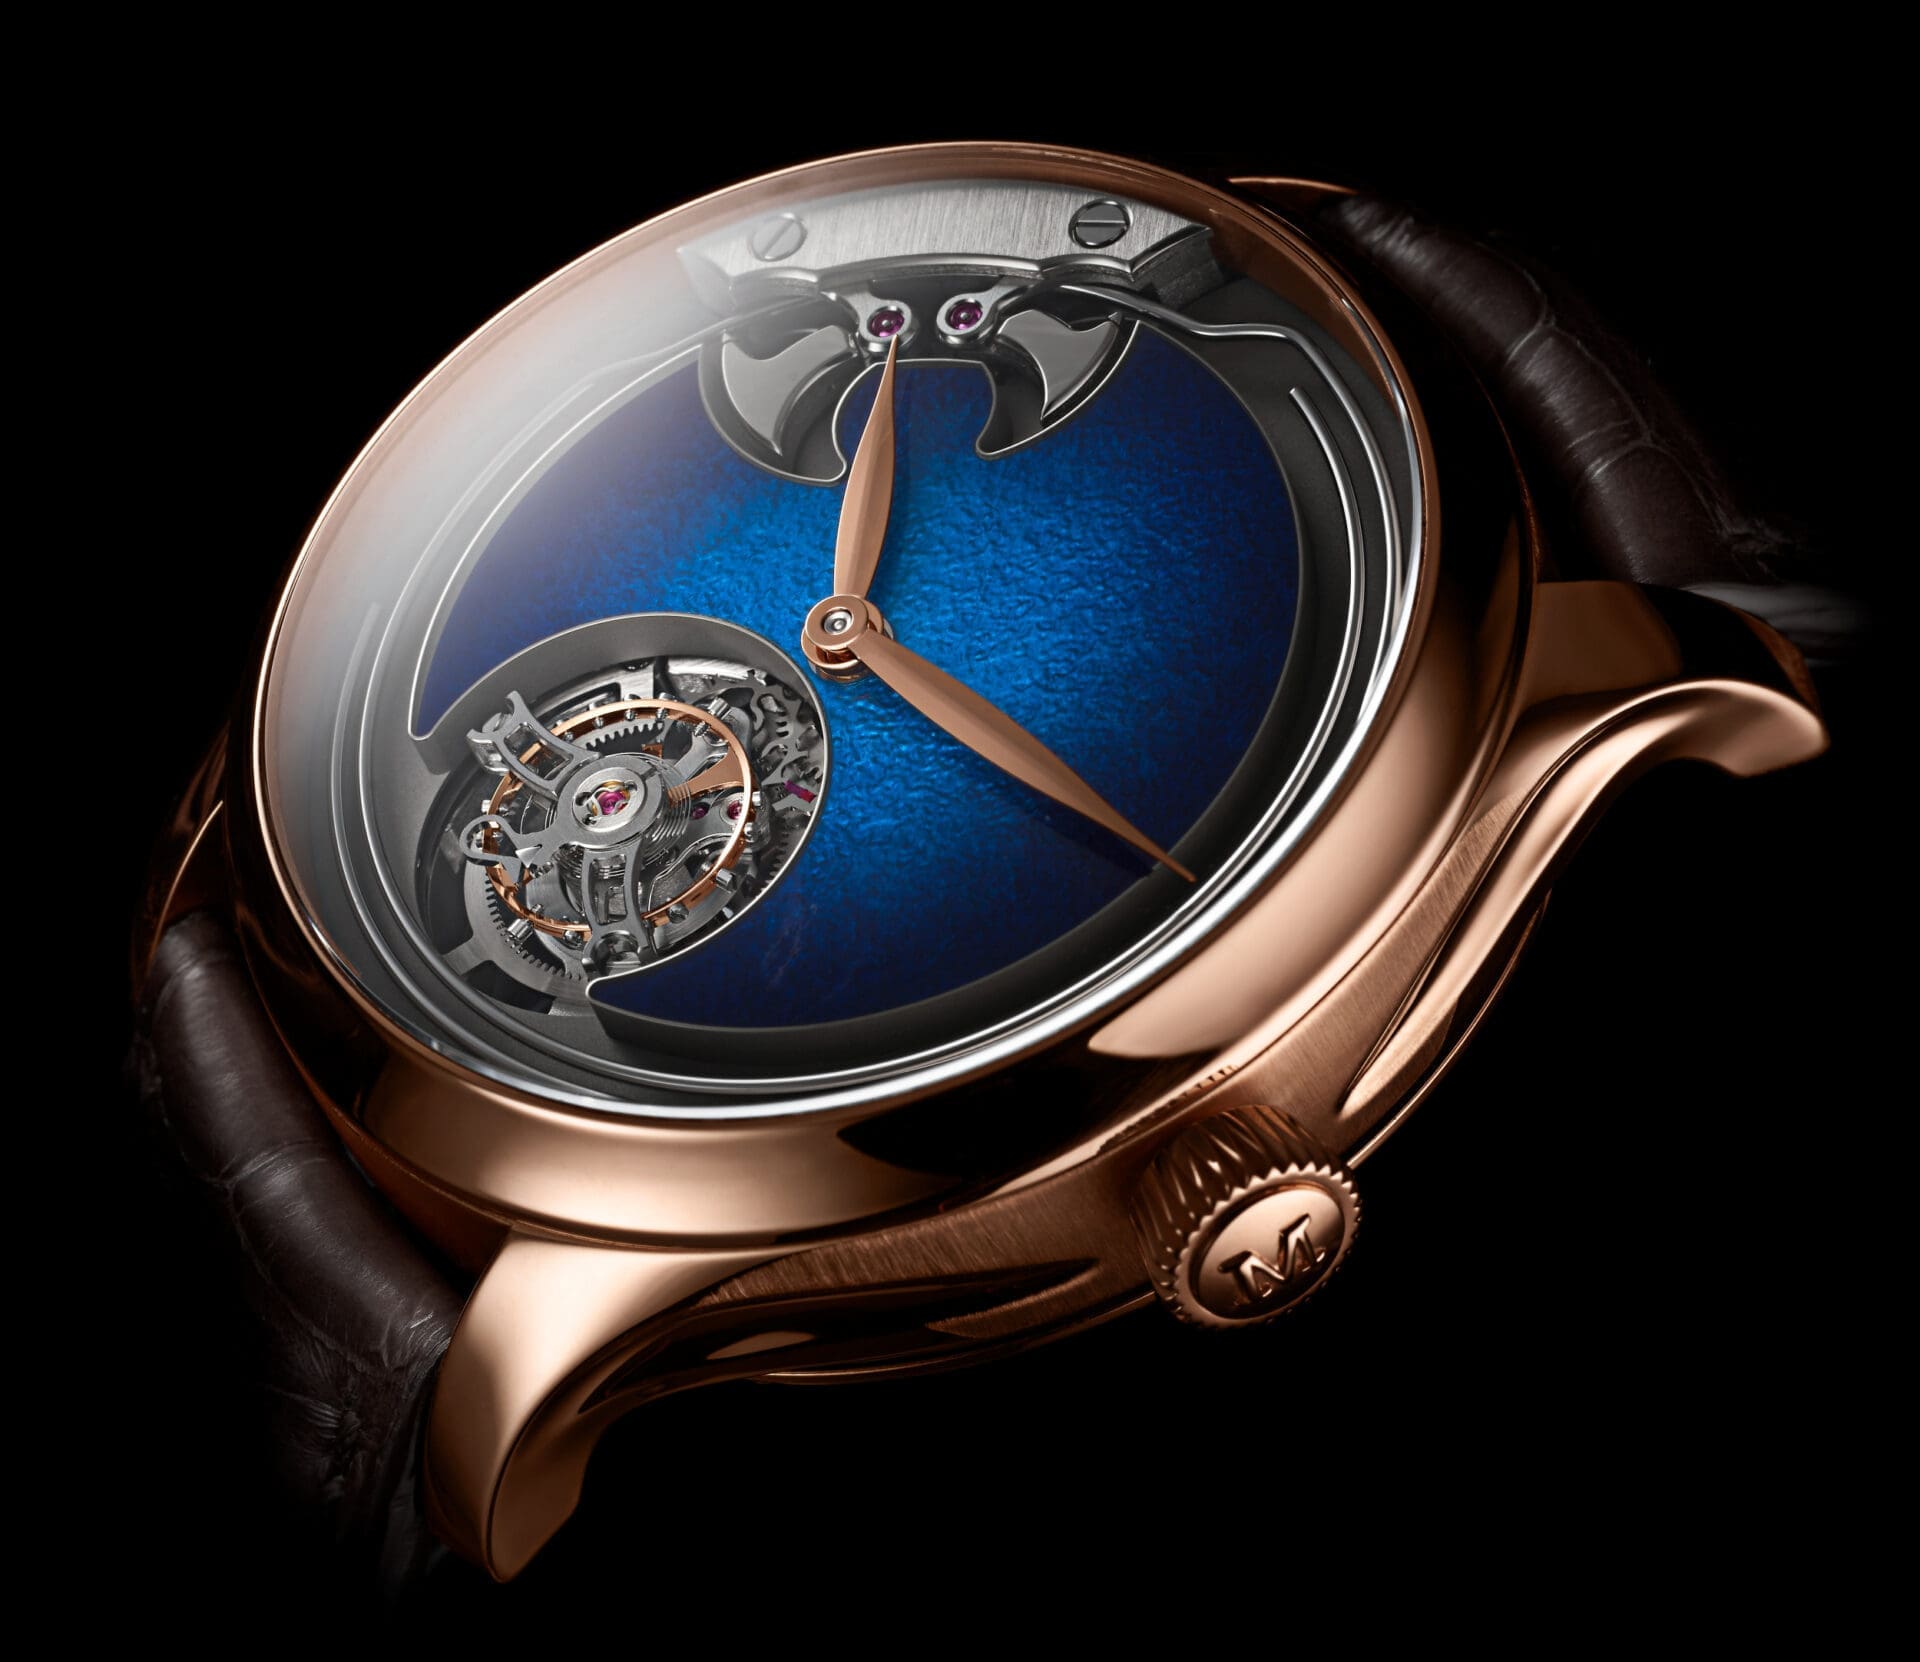 INTRODUCING: It’s chime time with the Moser Endeavour Concept Minute Repeater Tourbillon